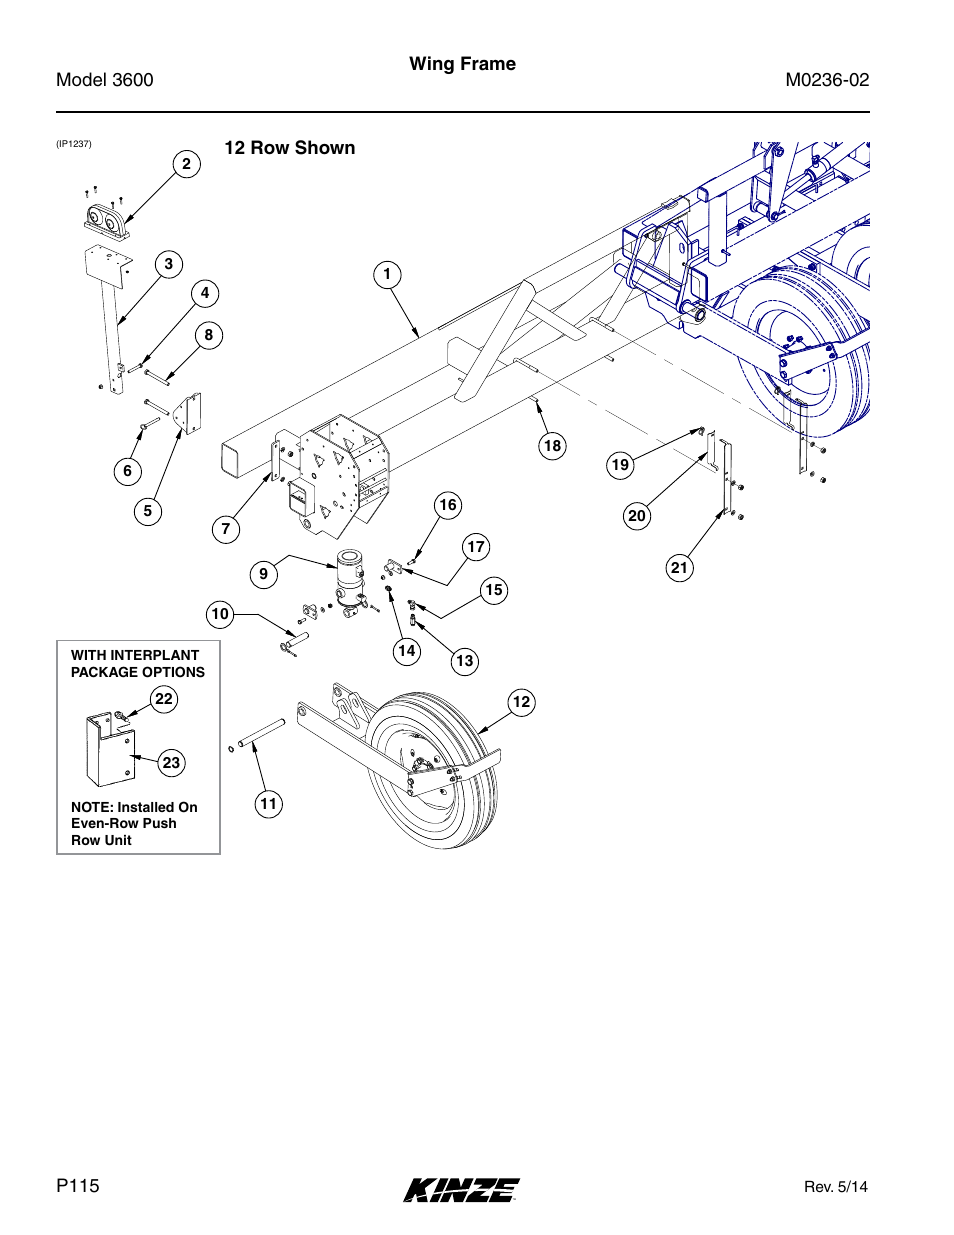 Wing frame | Kinze 3600 Lift and Rotate Planter Rev. 5/14 User Manual | Page 118 / 302